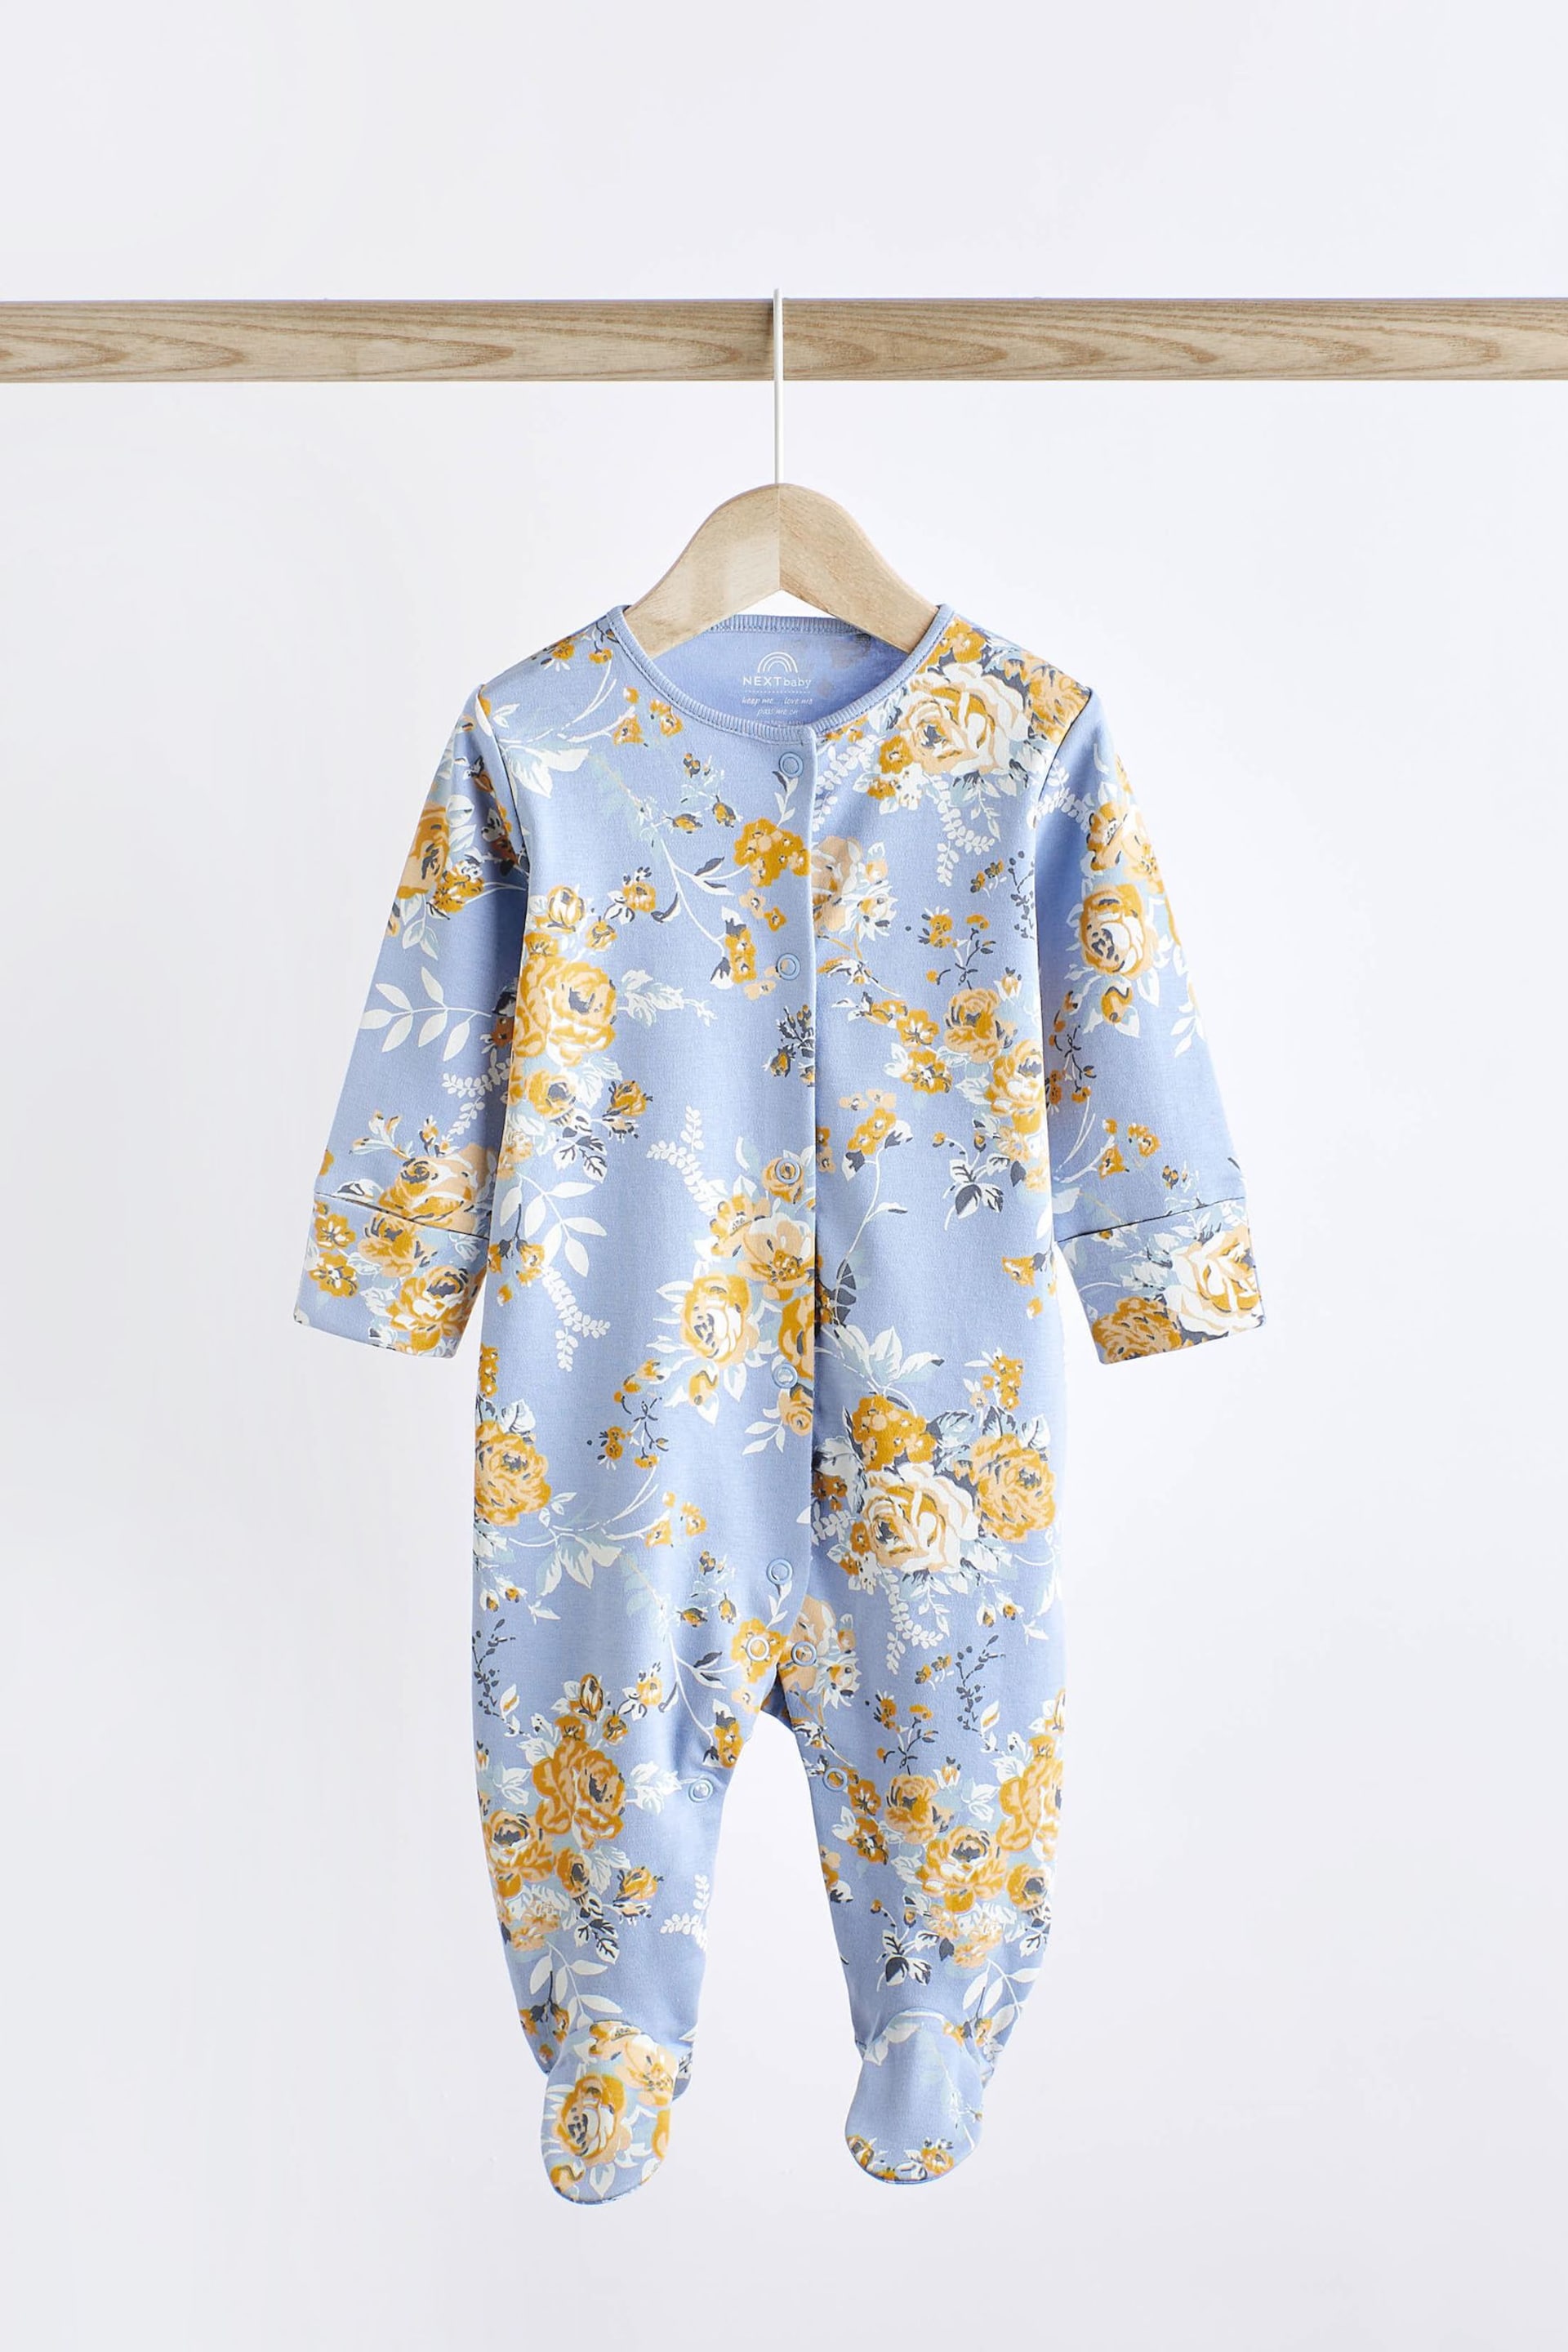 Ochre Yellow Baby Footed Sleepsuits 5 Pack (0-2yrs) - Image 6 of 16